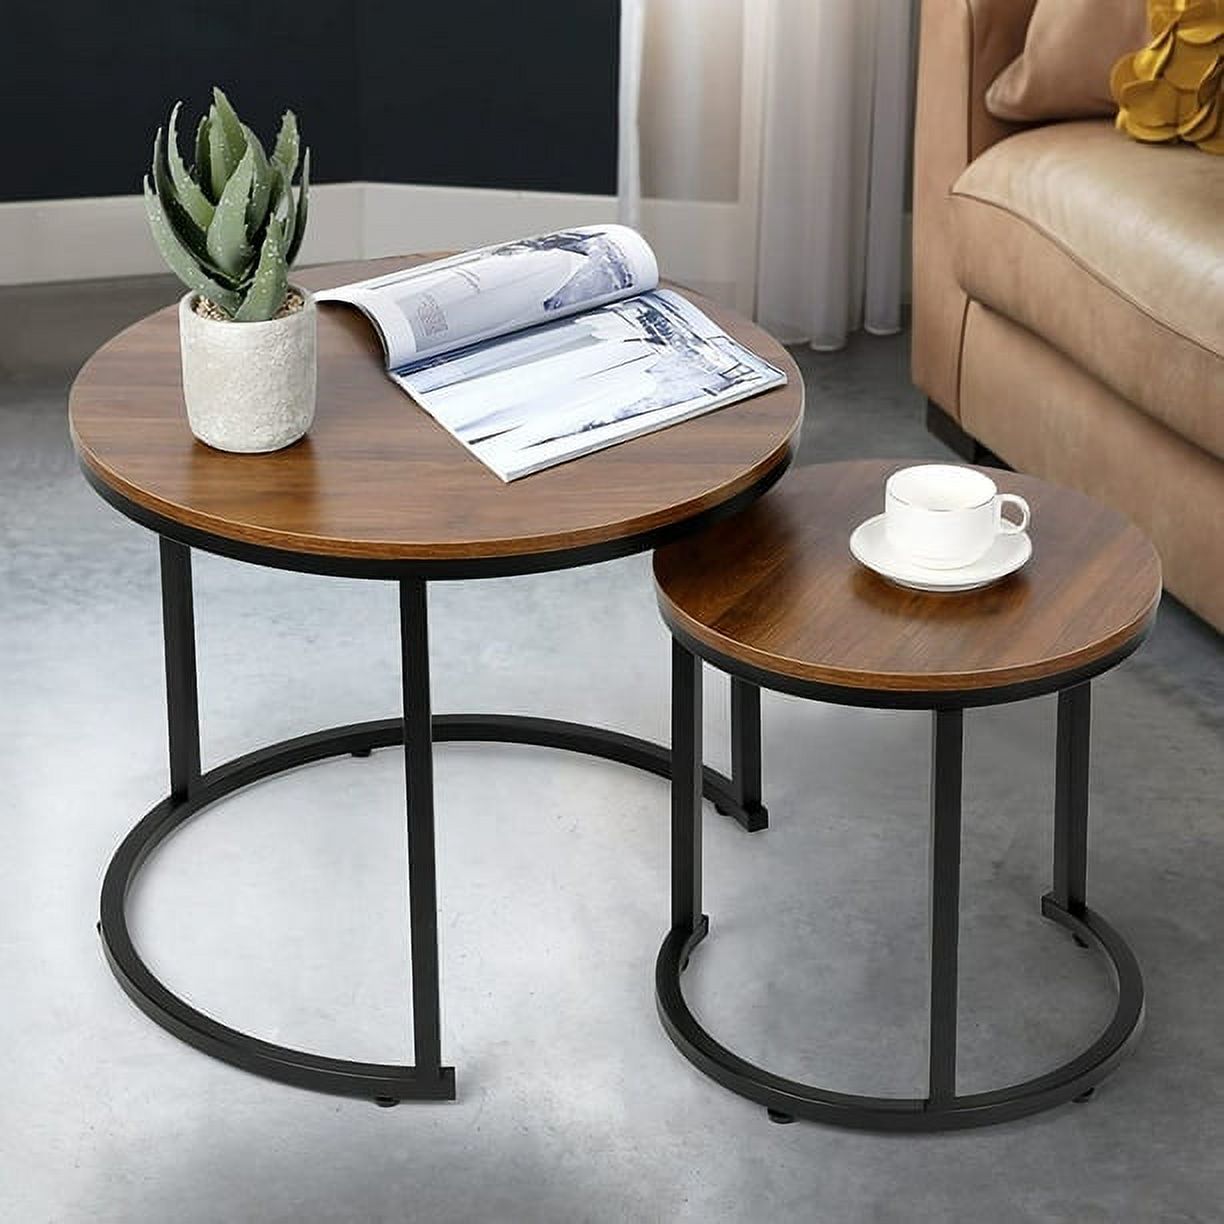 Ember Interiors Lokyle Metal and Wood Round Nesting Coffee Table, 3 ...